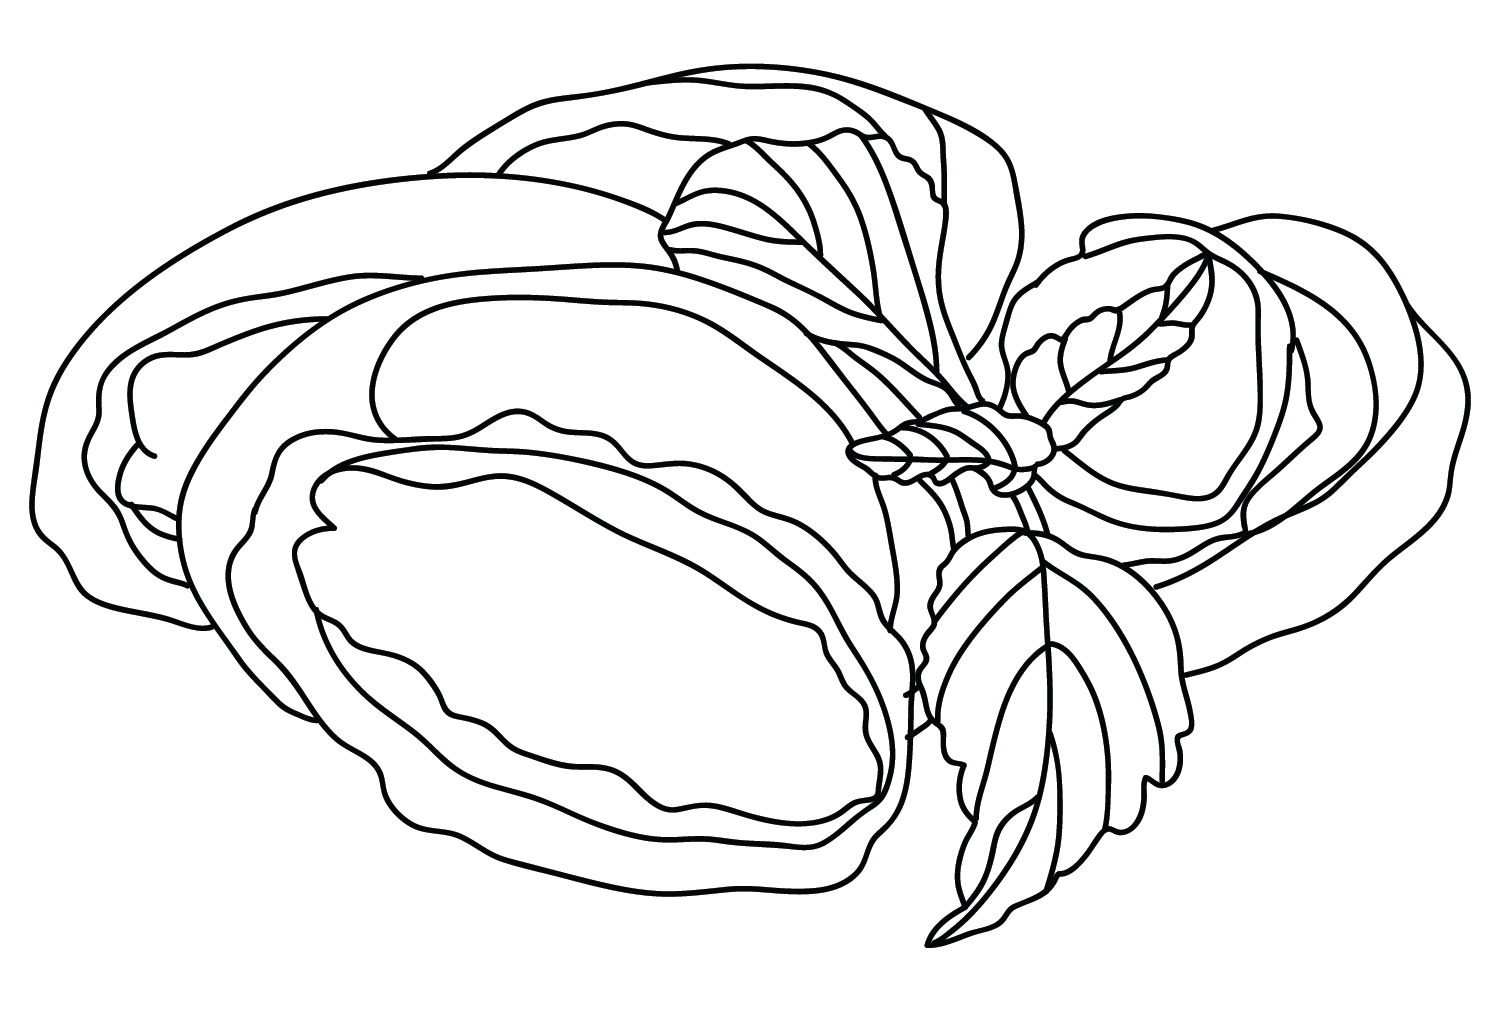 Abalone Printable Coloring Page from Abalone